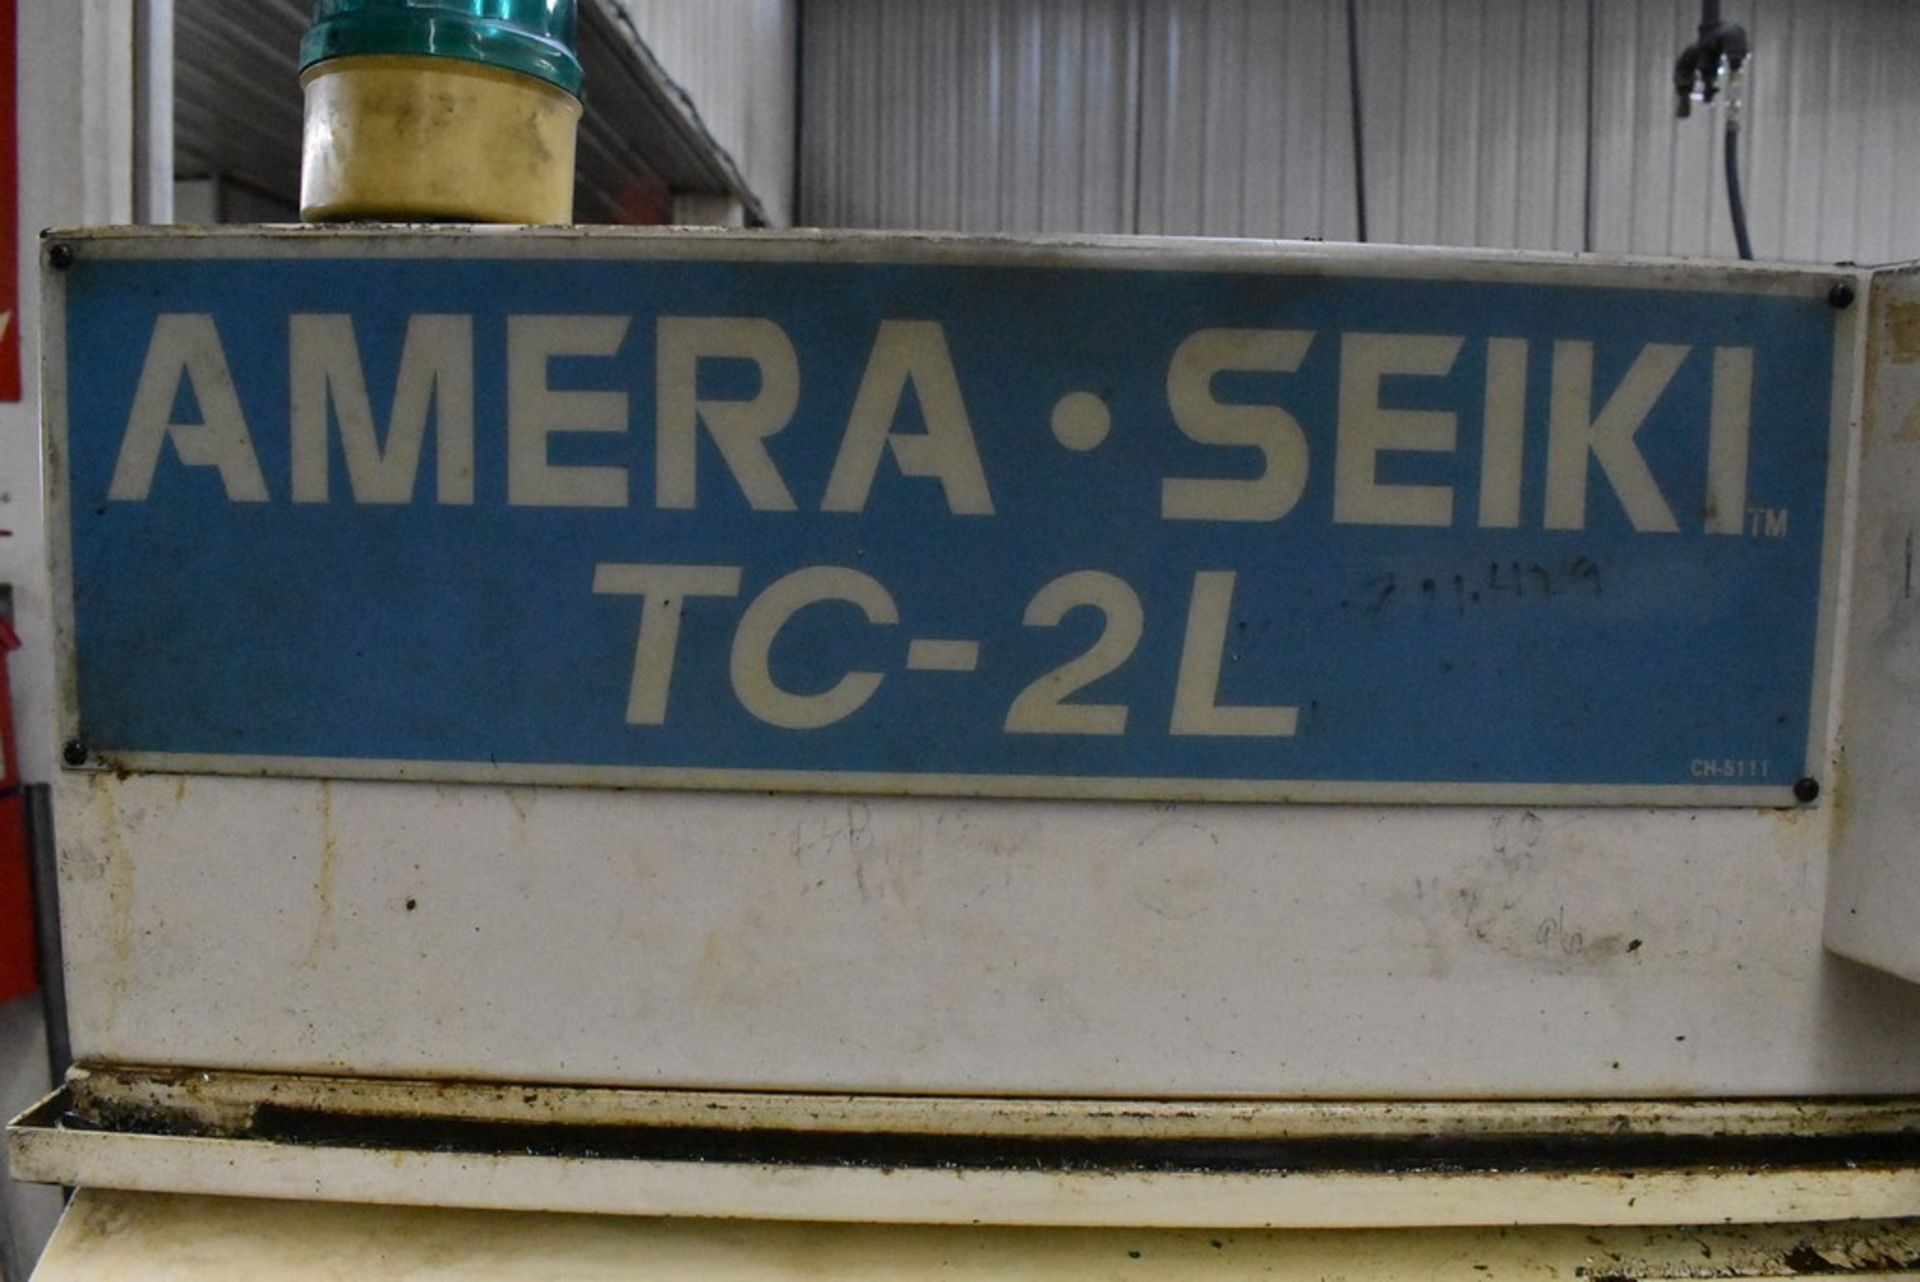 AMERA-SEIKI MODEL TC-2L CNC TURNING CENTER, S/N 78770, WITH CHUCK, TAILSTOCK, FANUC SERIES O-T - Image 4 of 17